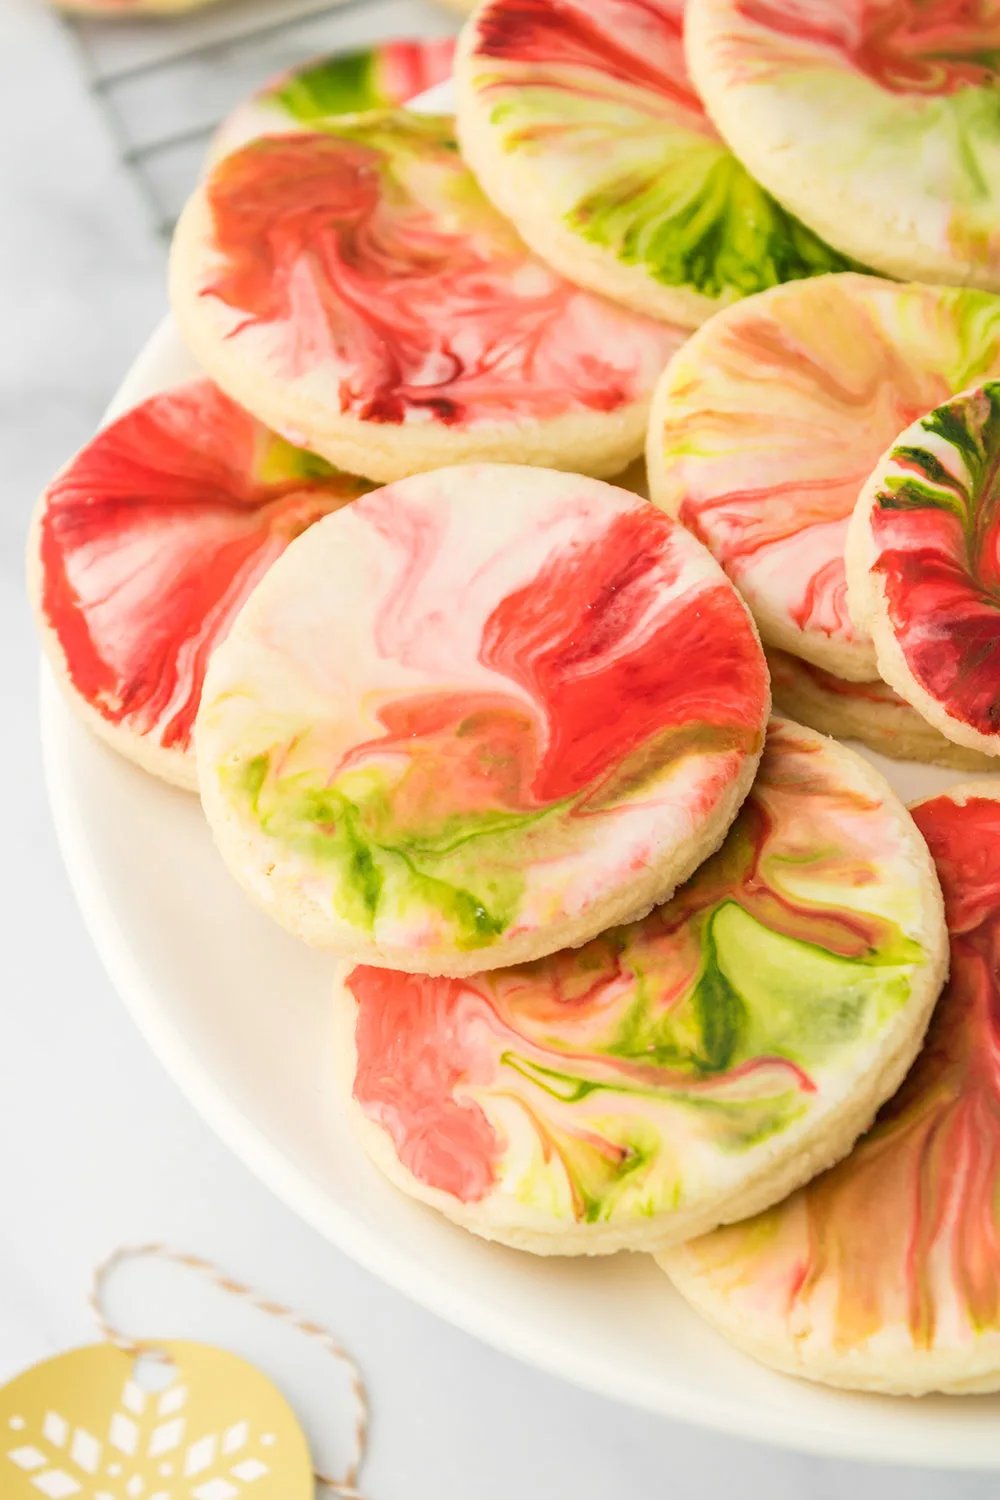 Plate full of swirled red and green iced holiday cookies.